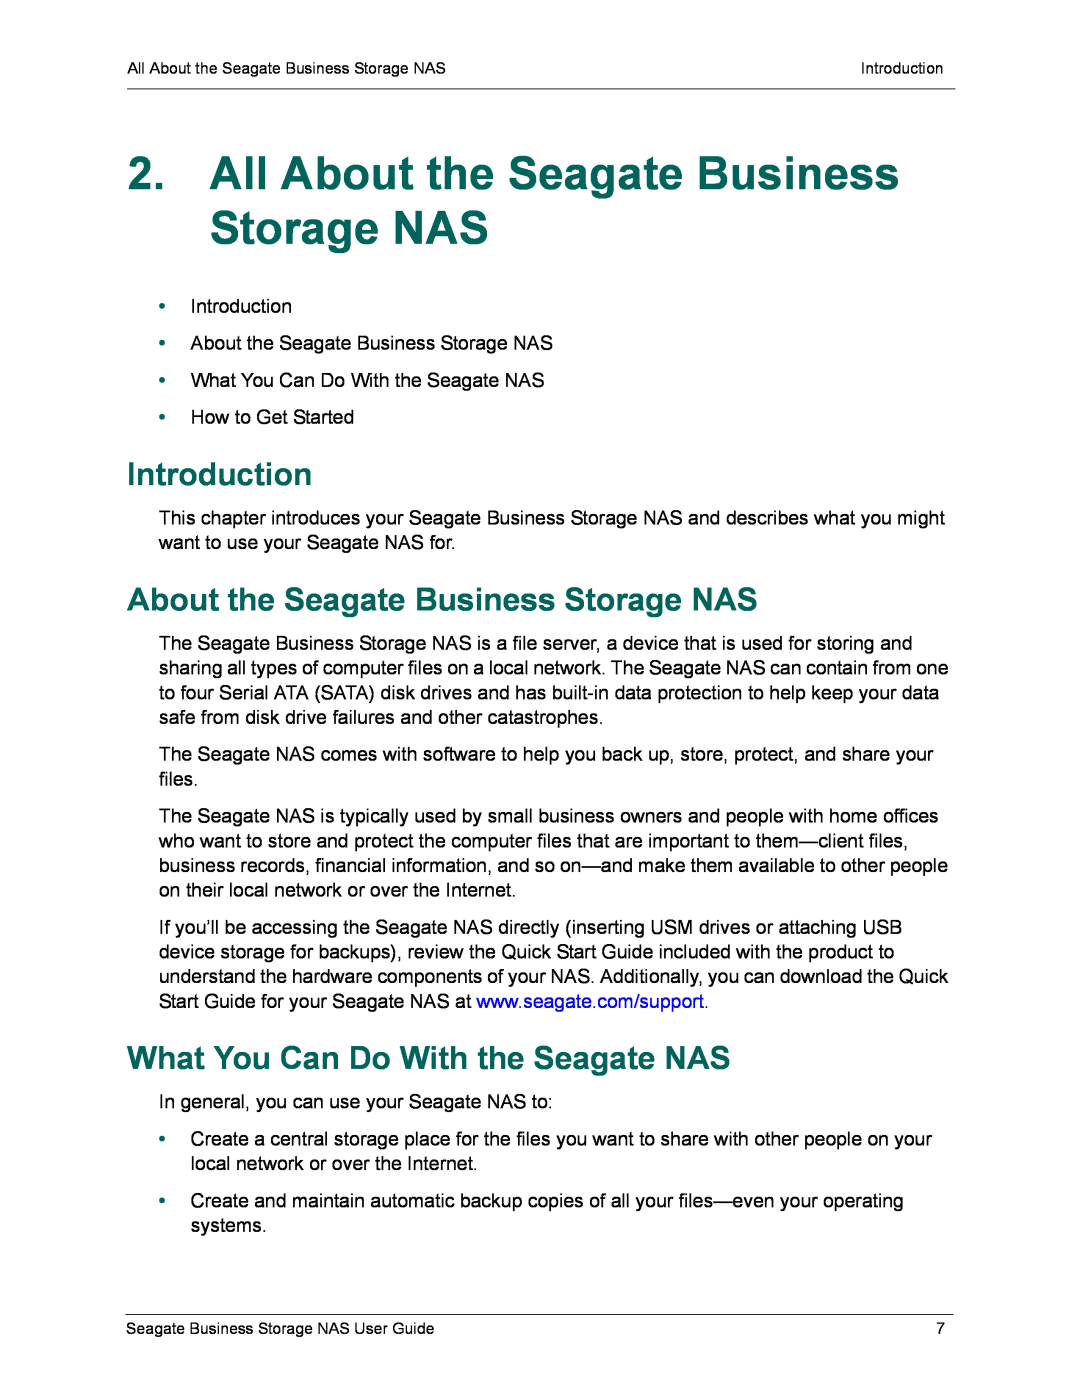 Seagate STBM4000100 manual All About the Seagate Business Storage NAS, Introduction, What You Can Do With the Seagate NAS 